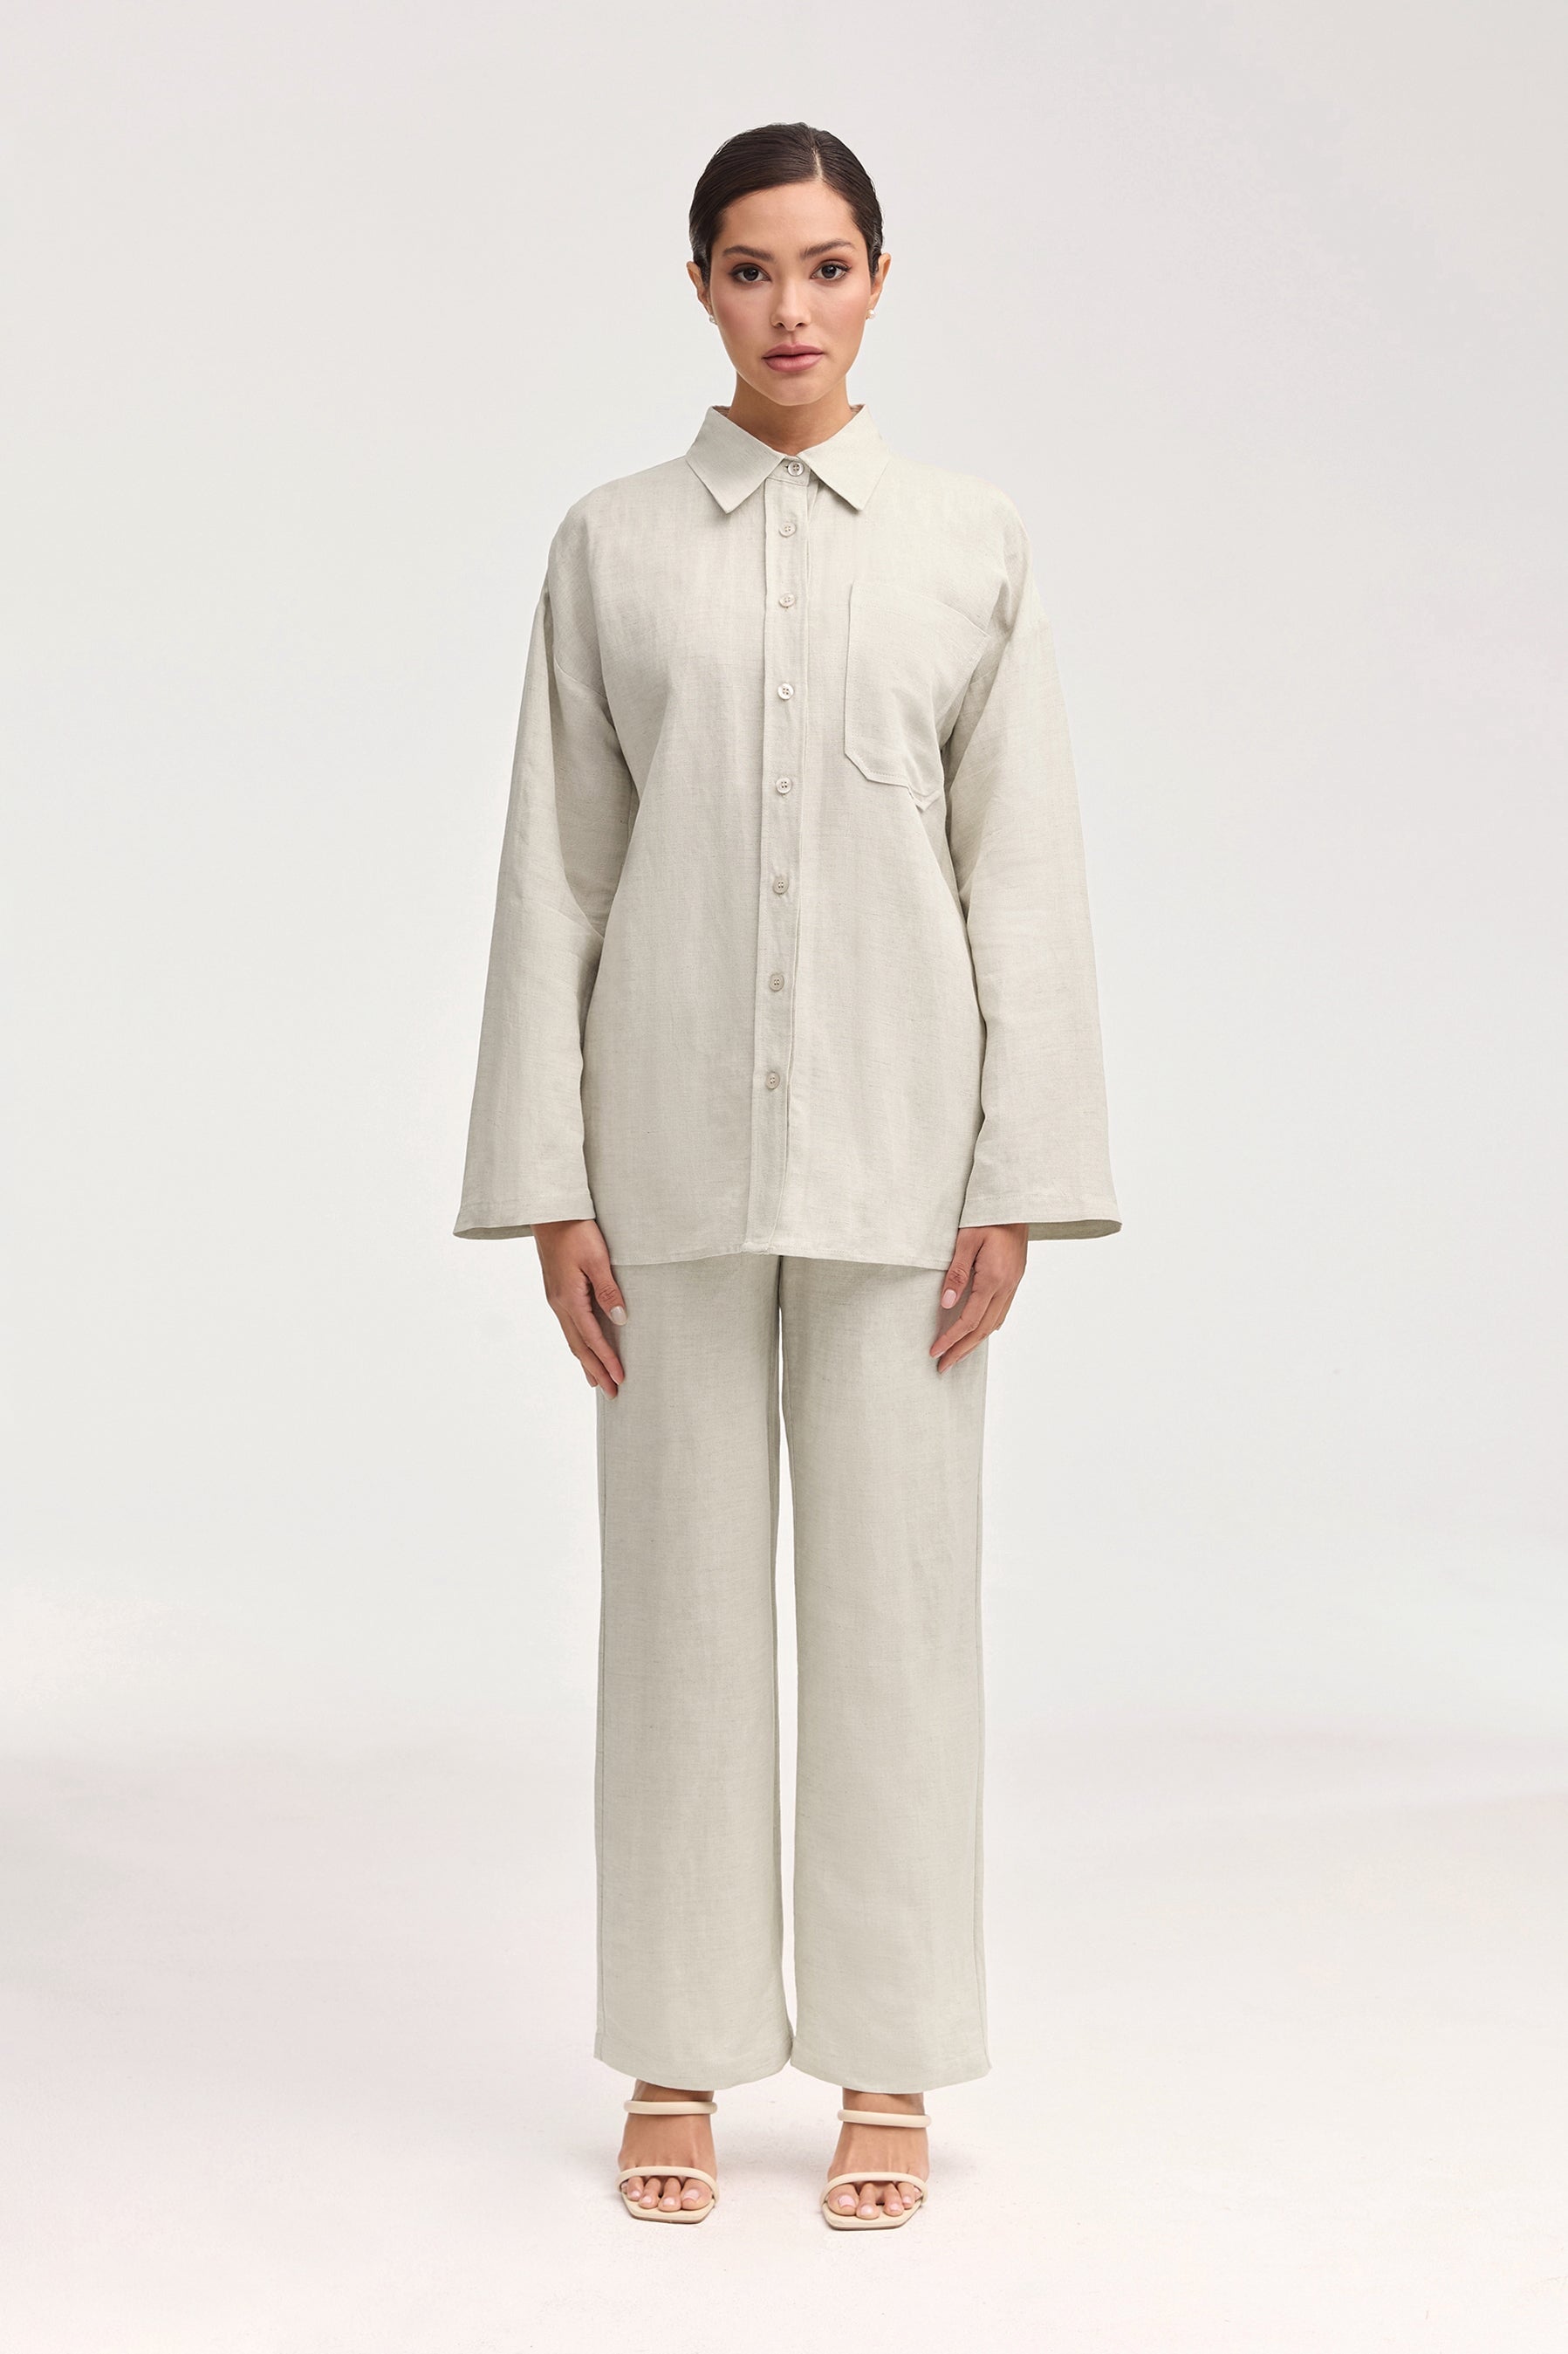 Adalila Linen Button Down Top - Oatmeal Clothing Veiled 